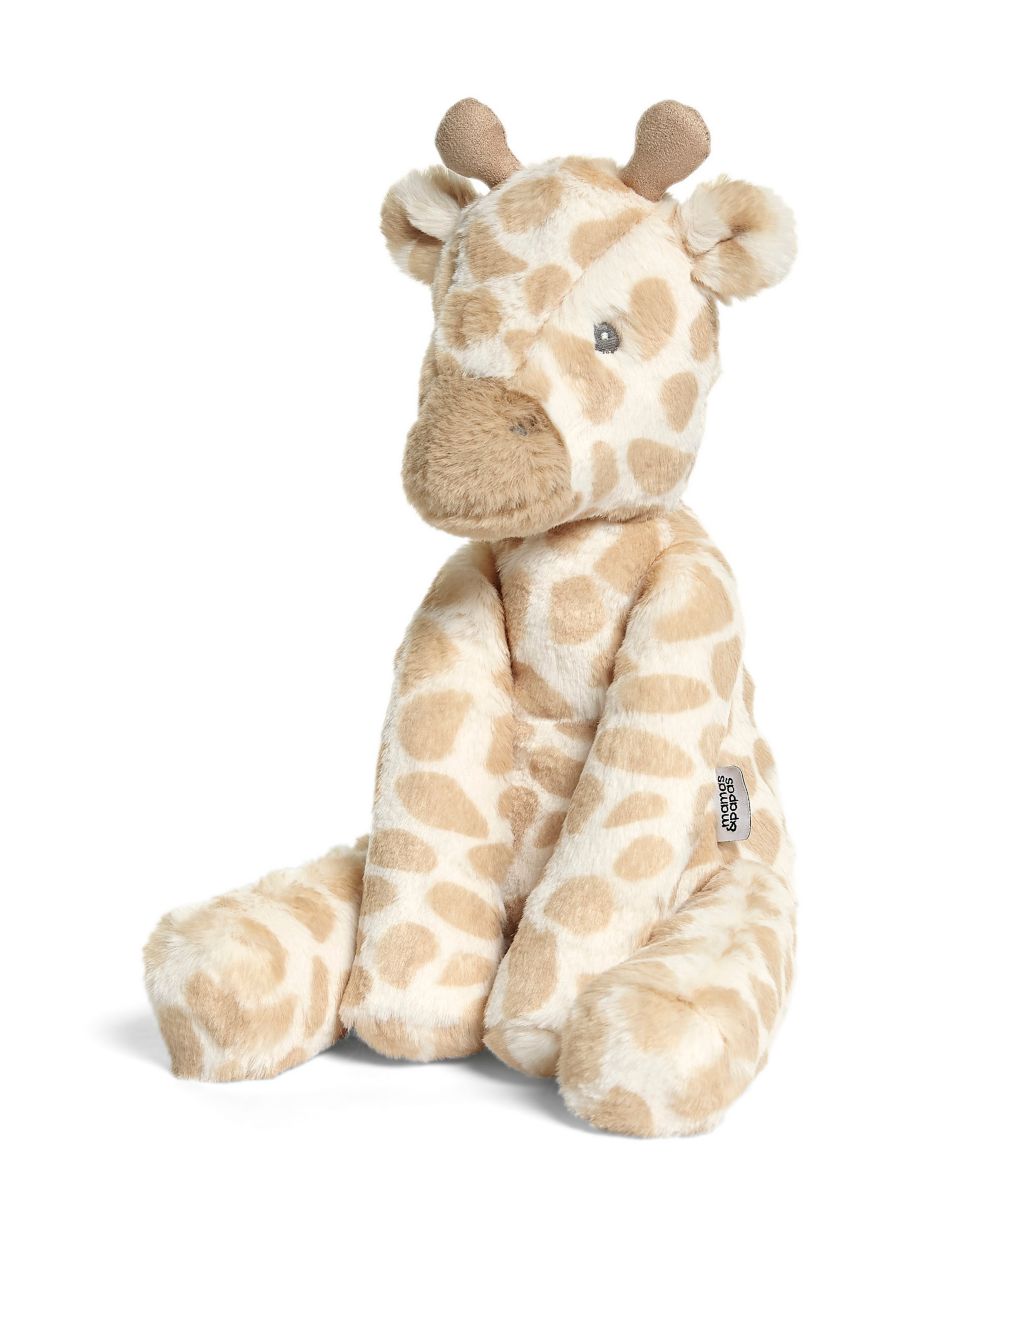 Welcome to the World Giraffe Soft Toy image 1